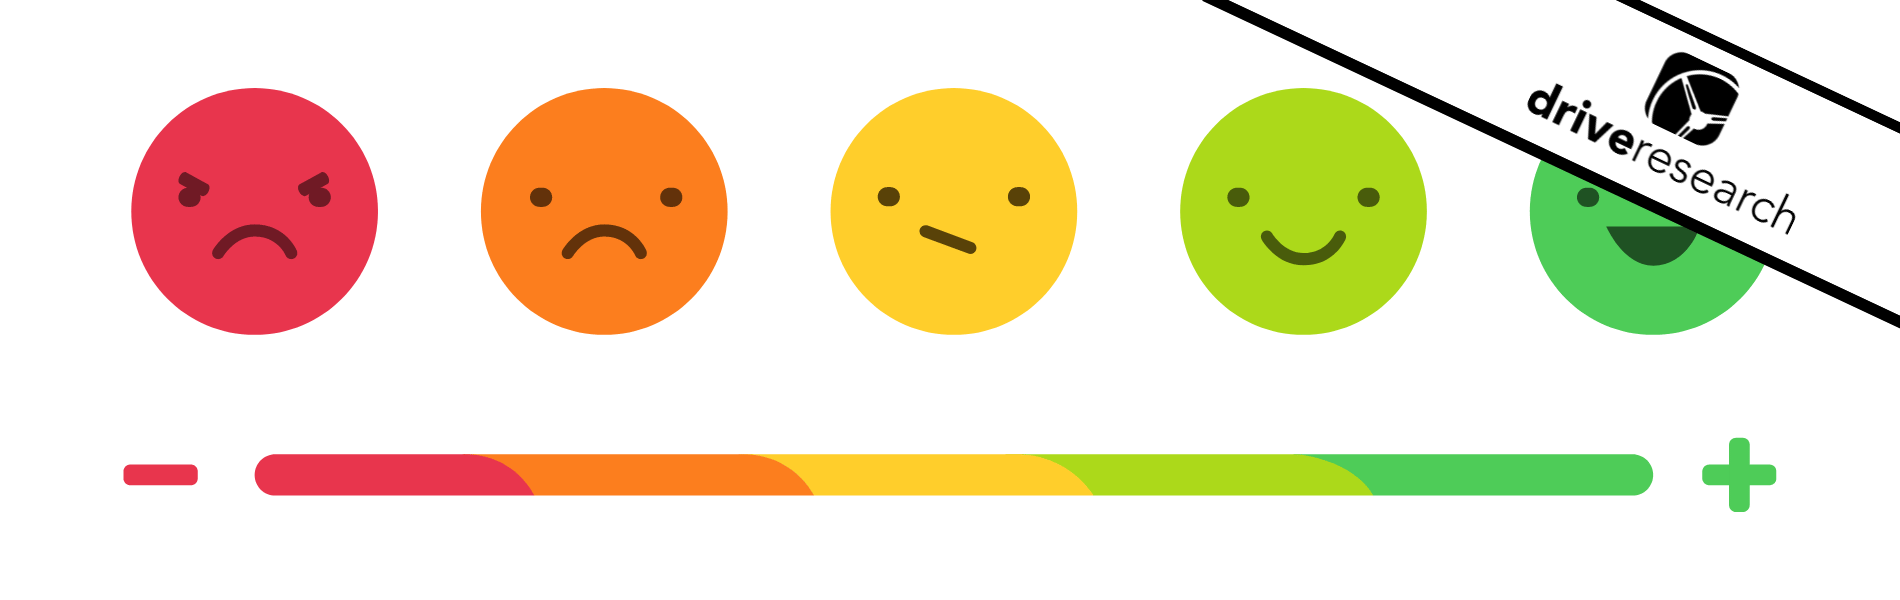 survey scale with emotion faced icons